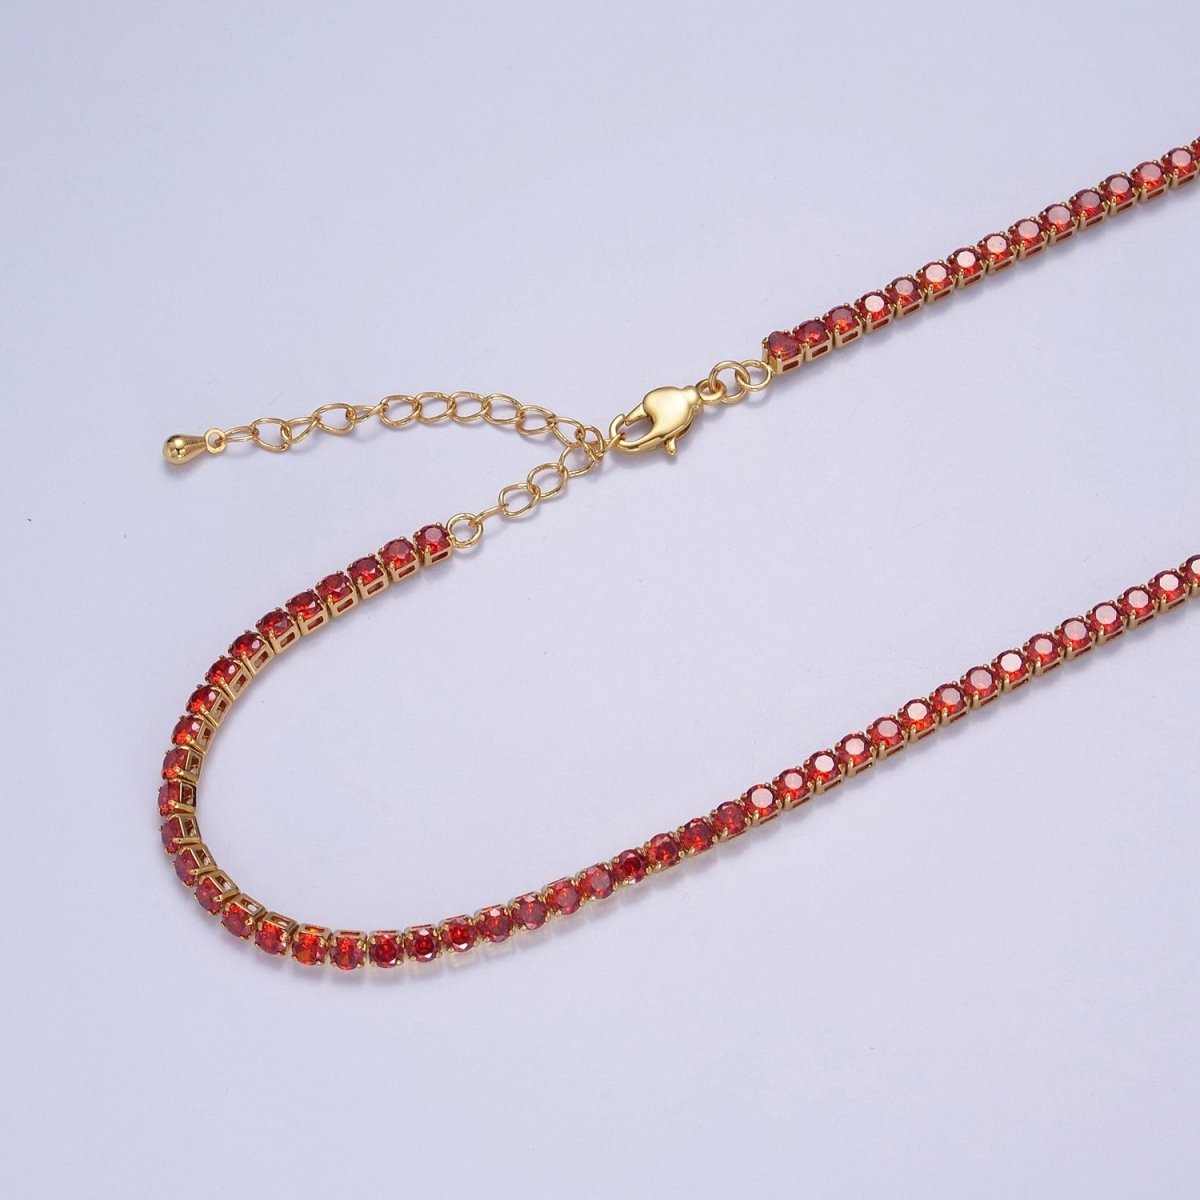 Peach, Red, Yellow Tennis Necklace | 3mm Round Cubic Zirconia Necklace | Diamond CZ Tennis Chain Necklace | Adjustable Layer Necklace | WA-893 to WA-895 Clearance Pricing - DLUXCA